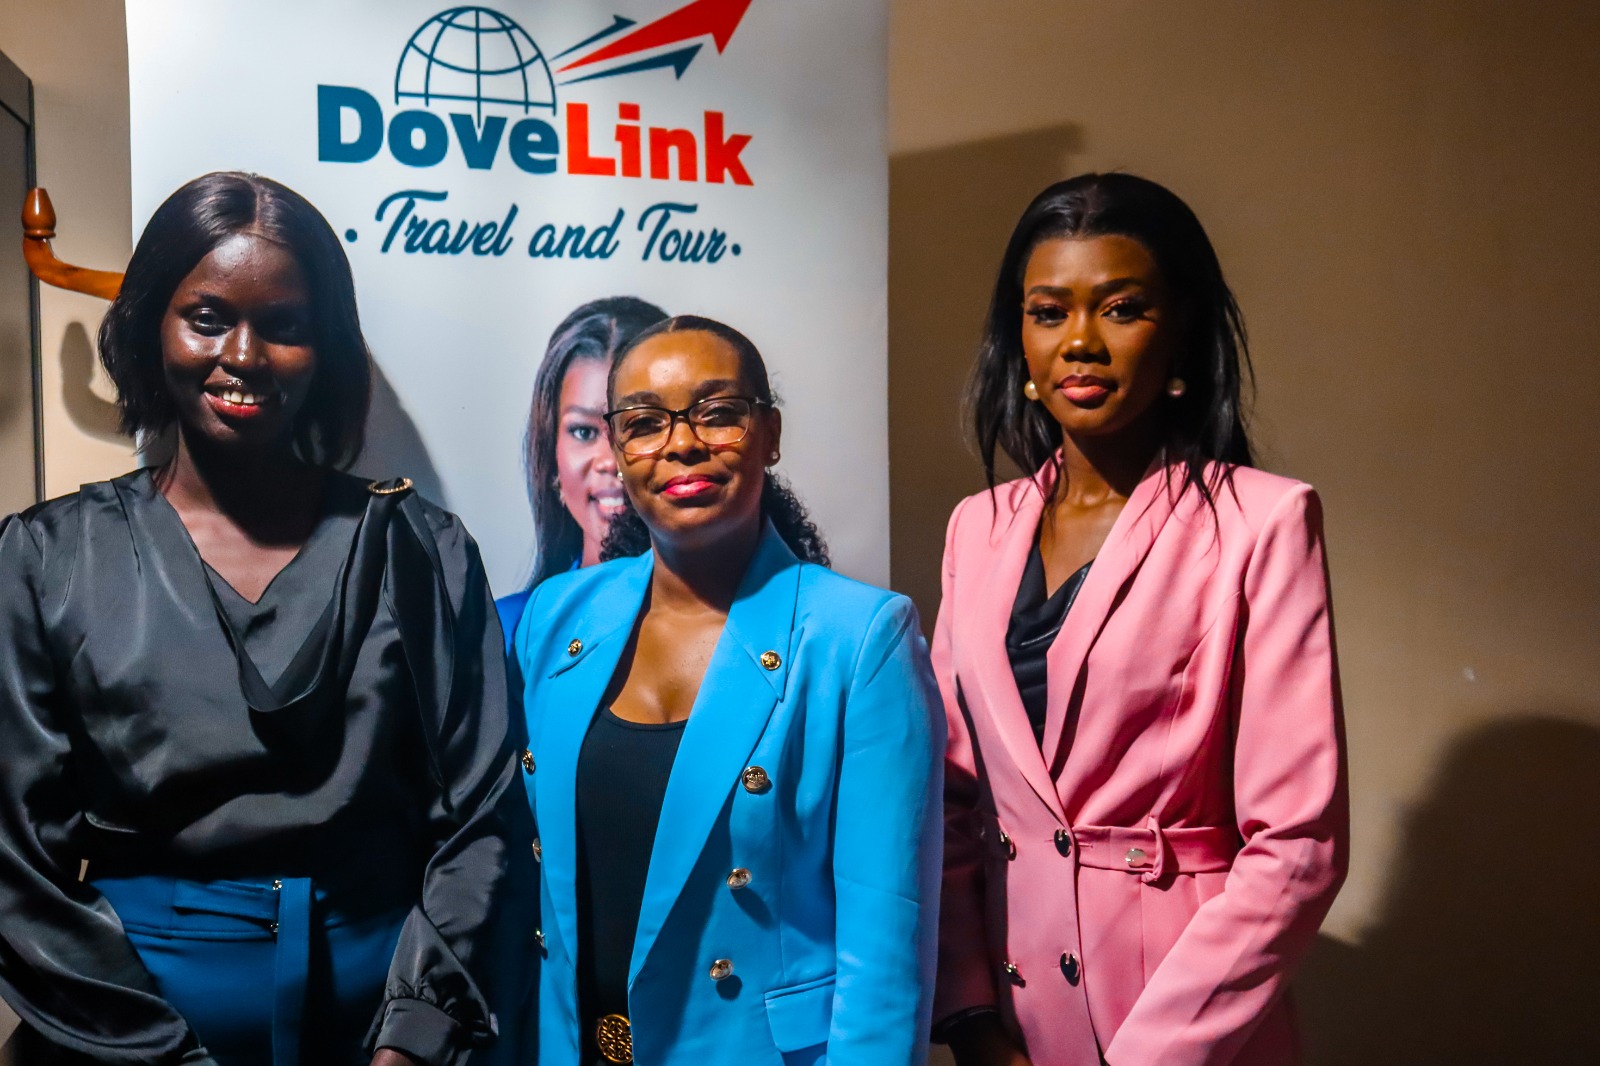 Why you should have a life-time experience with Dovelink and Tour